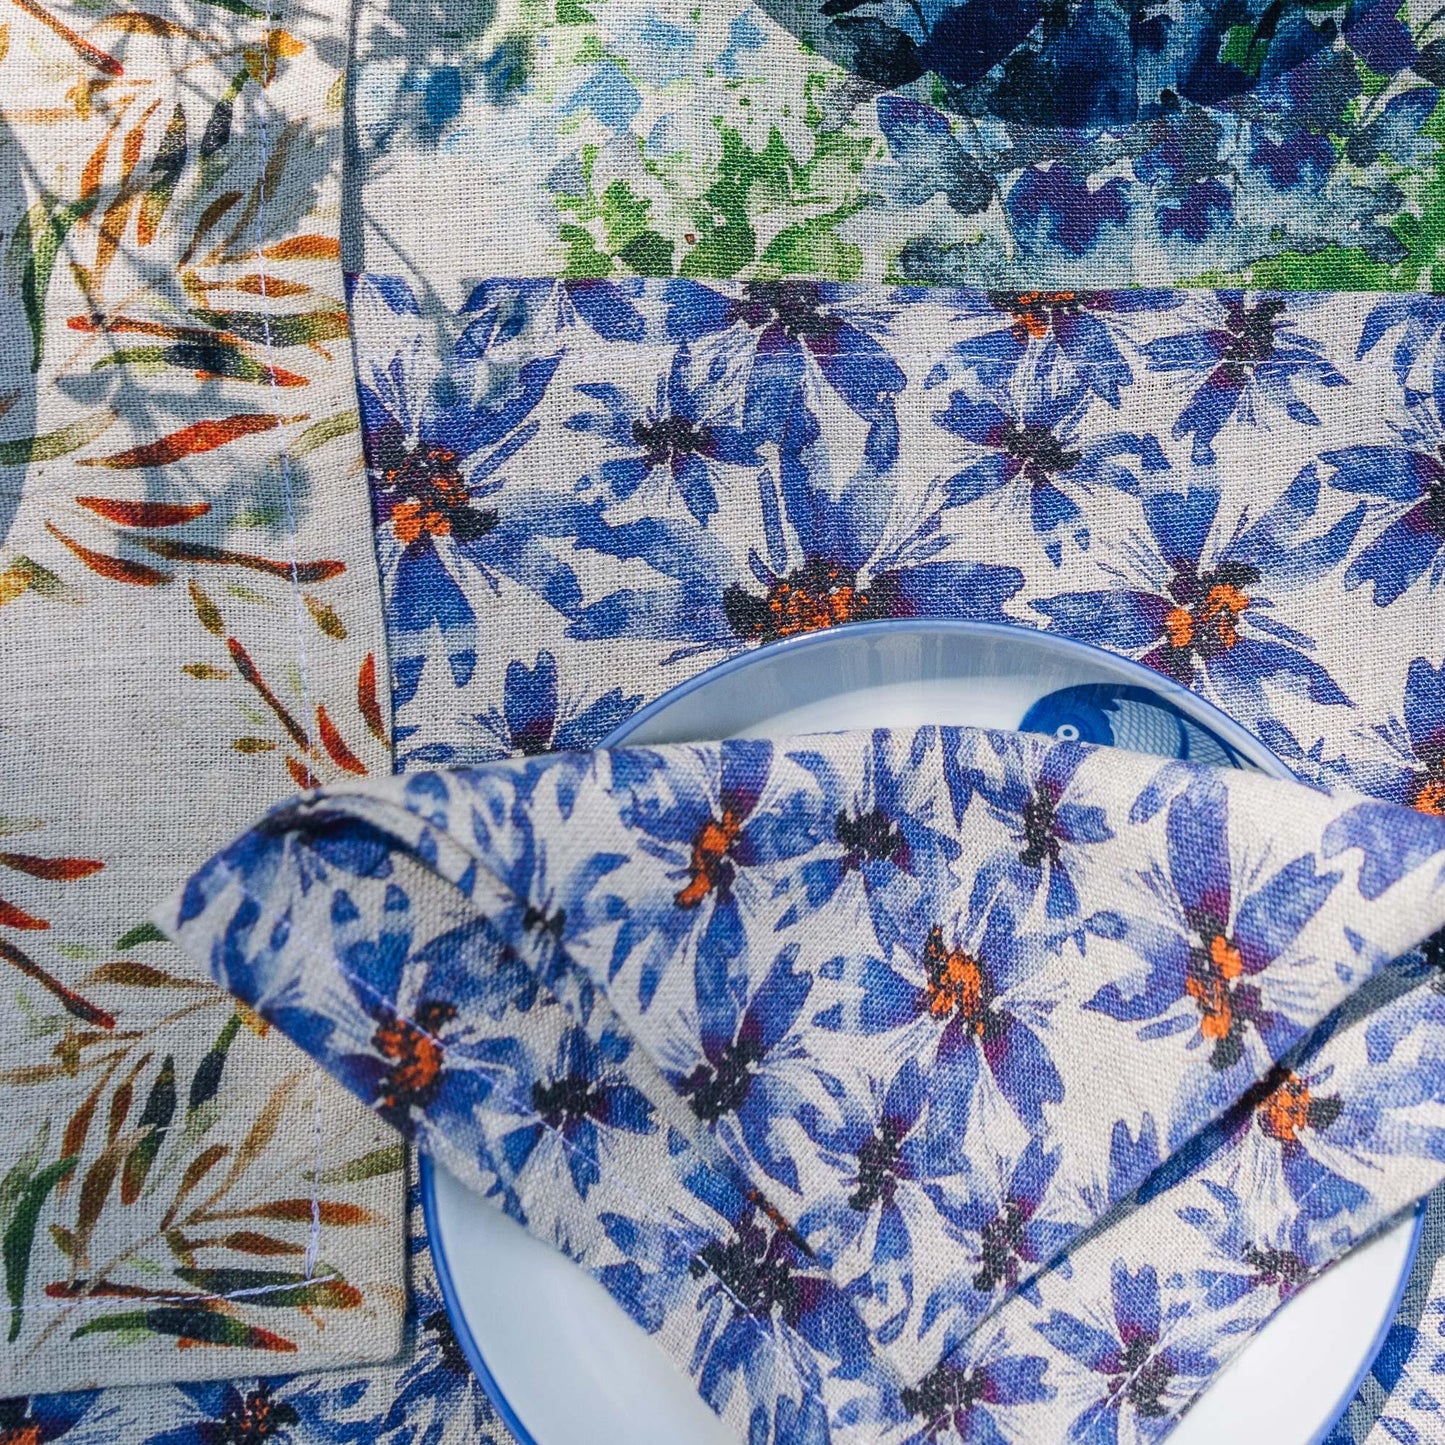 Close up of a rectangular placemat and napkin made of organic linen and ethically produced in India, printed with blue cornflowers and orange blossoms, designed by Sophie Williamson Design